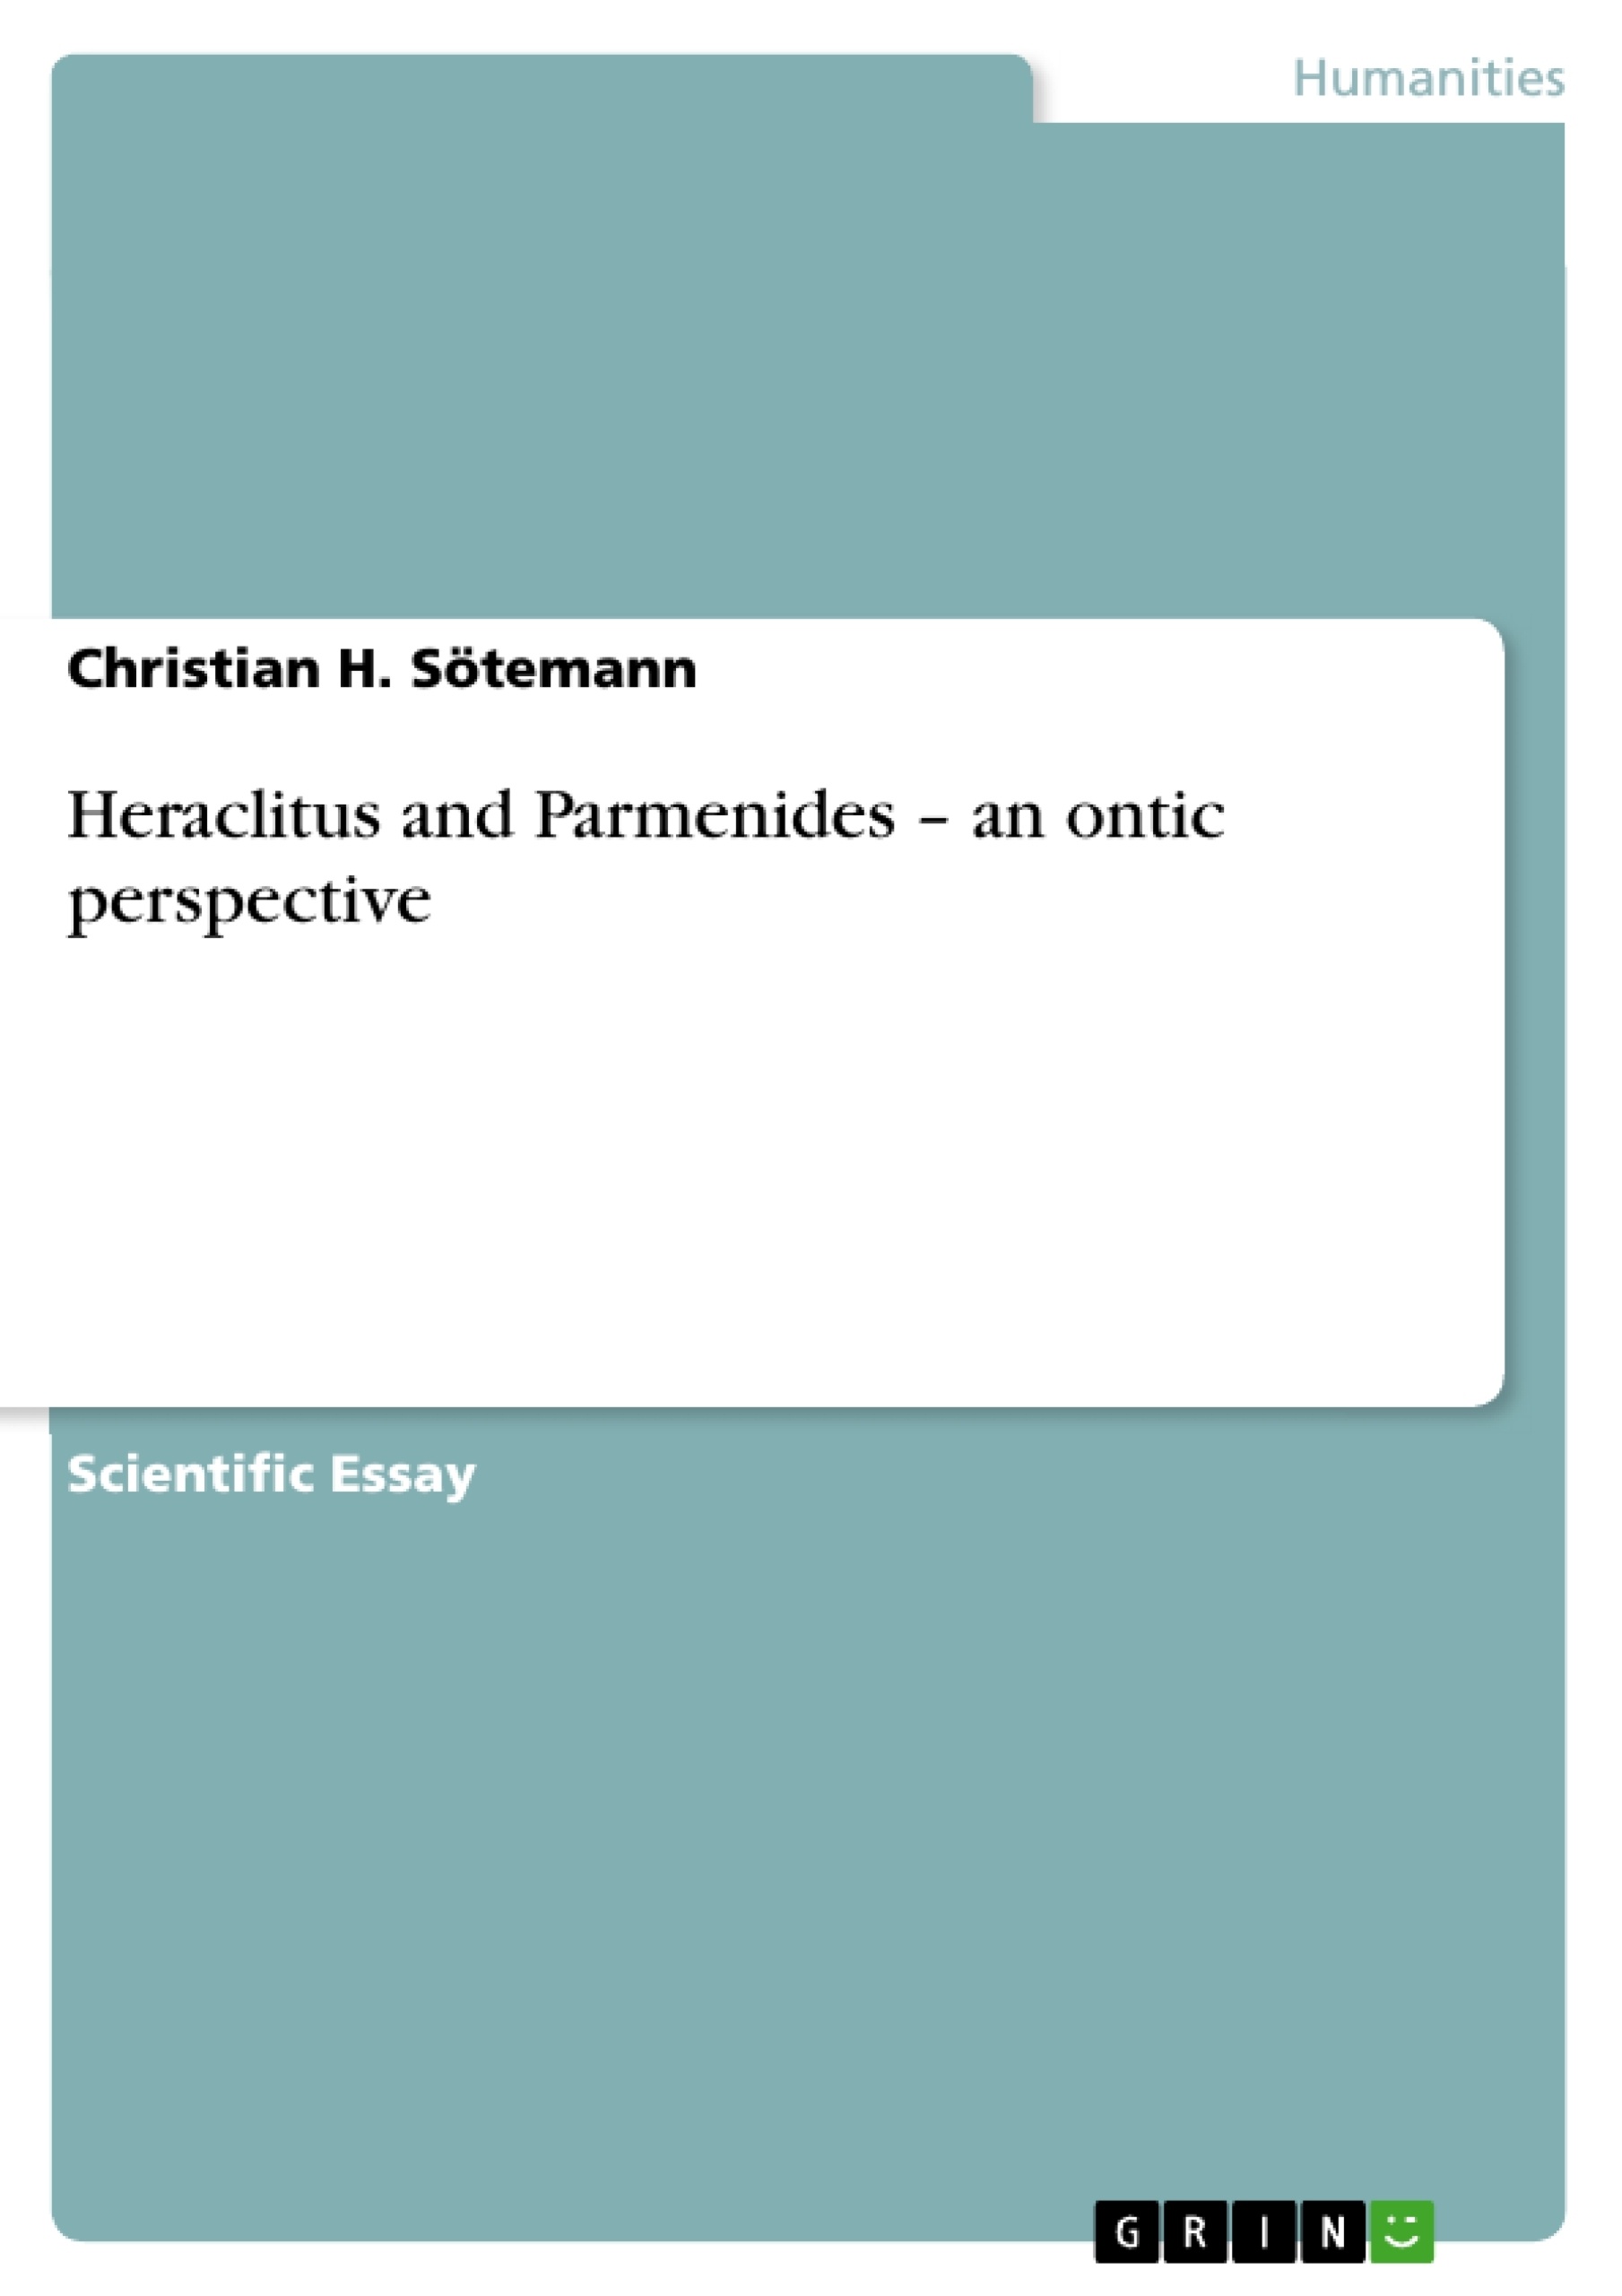 Title: Heraclitus and Parmenides – an ontic perspective